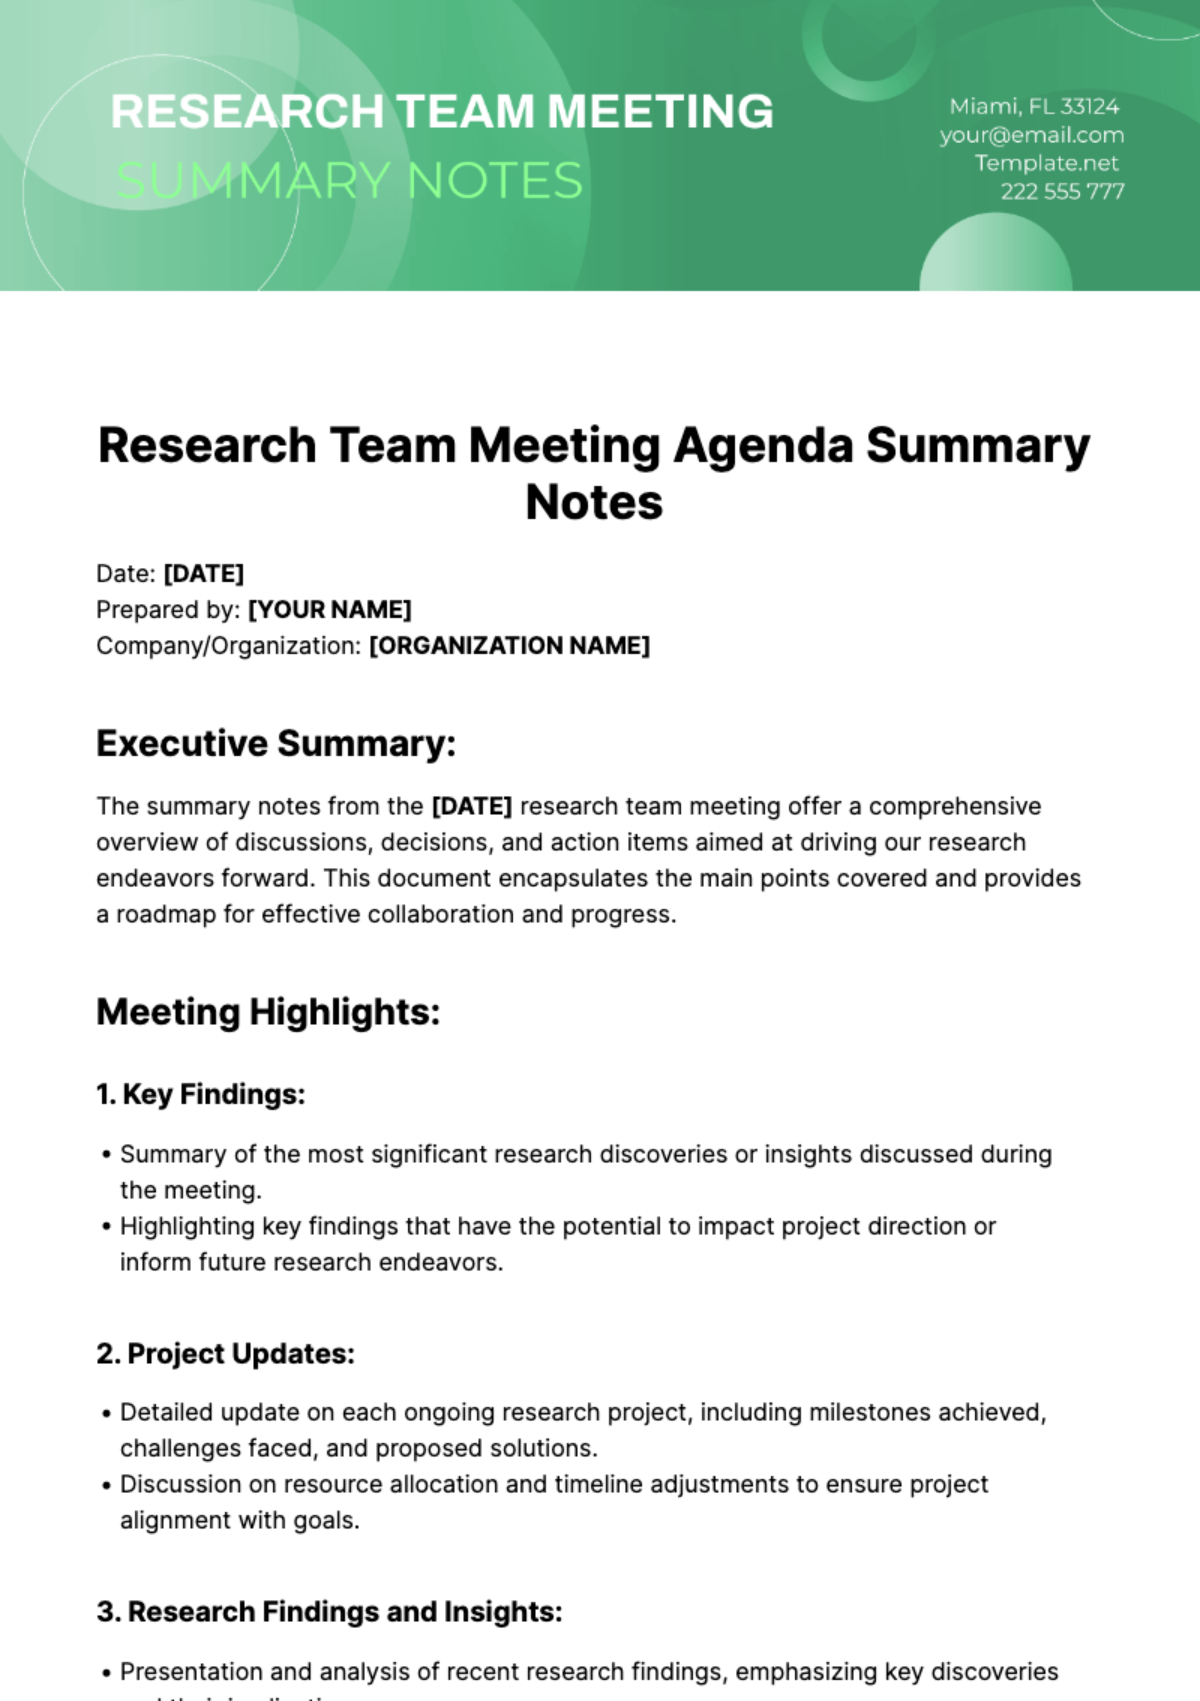 Research Team Meeting Agenda Summary Notes Template